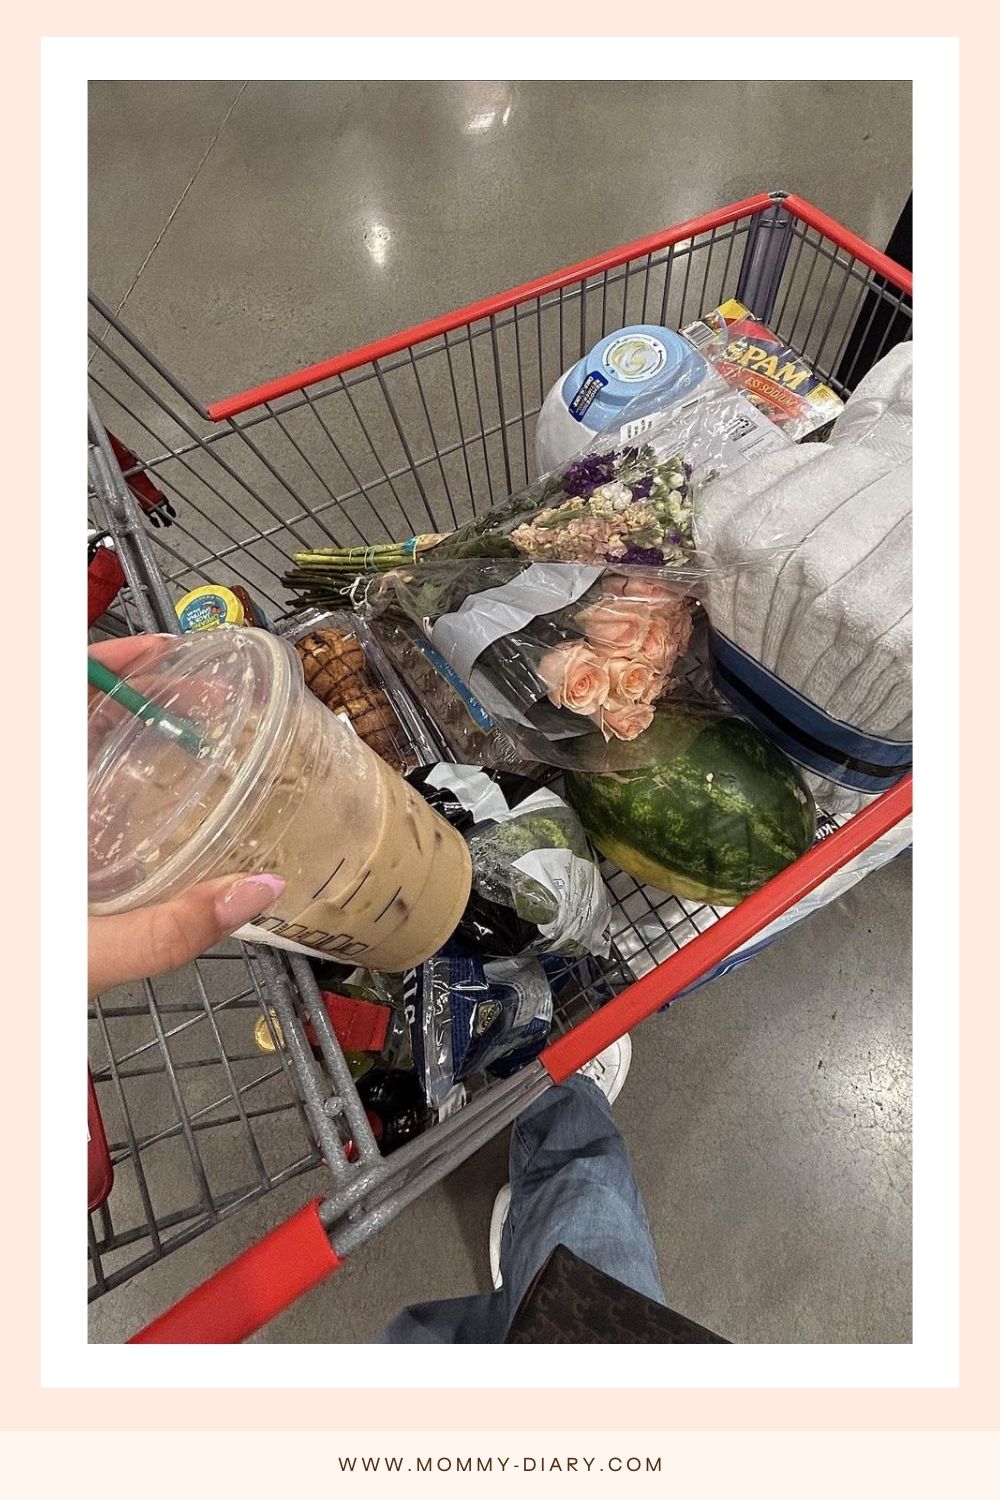 Grocery cart with items